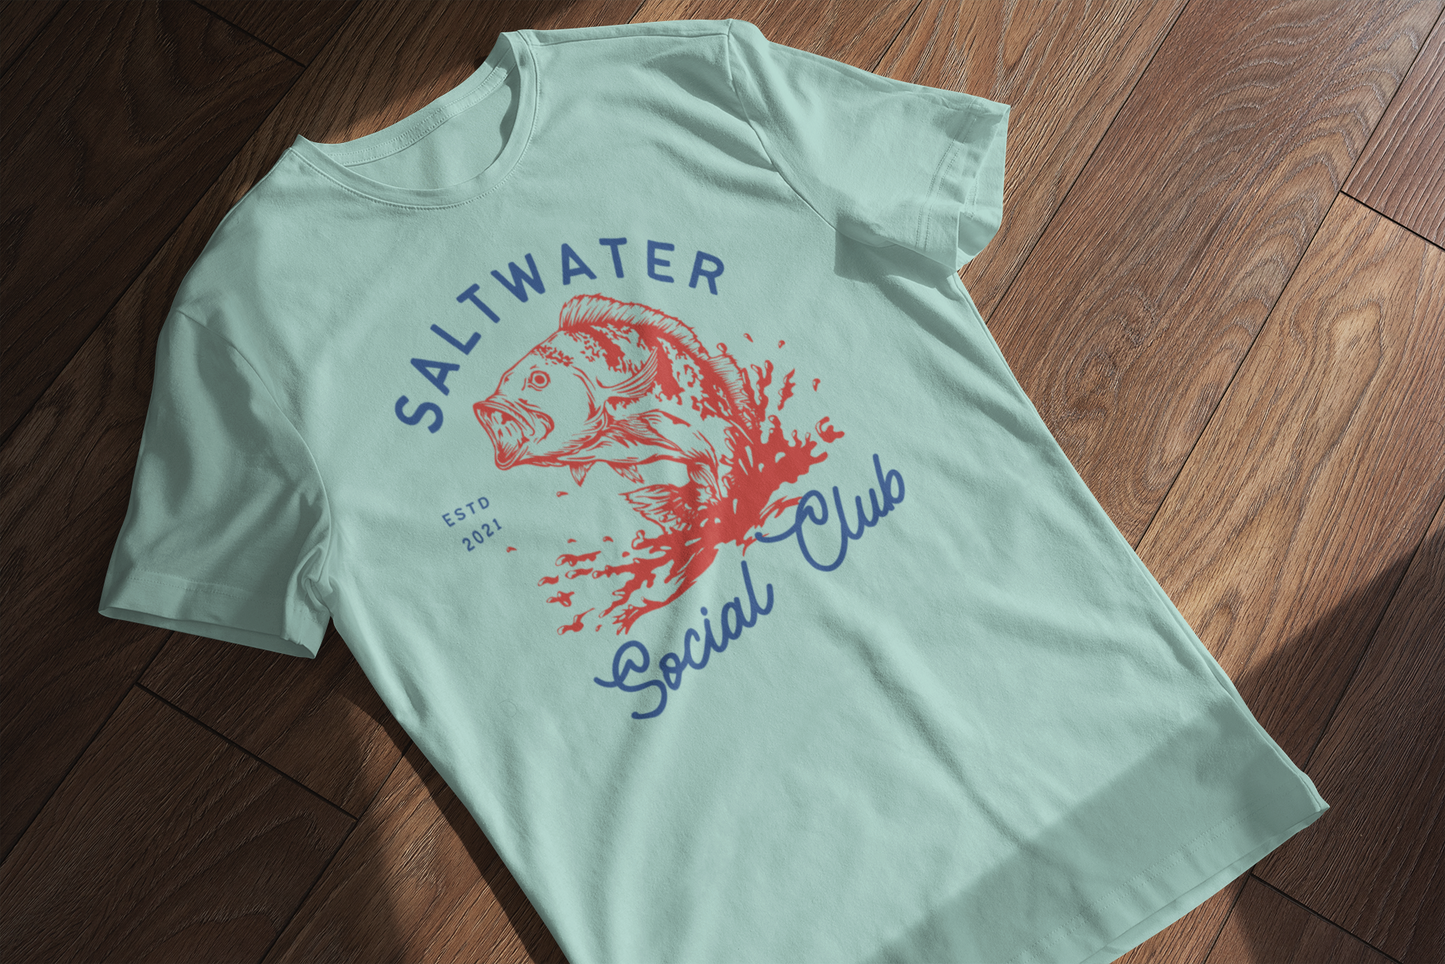 Saltwater Social Club T-Shirt - Comfort Colors 1717, Ultra-Soft Ring-Spun Cotton, Relaxed Fit